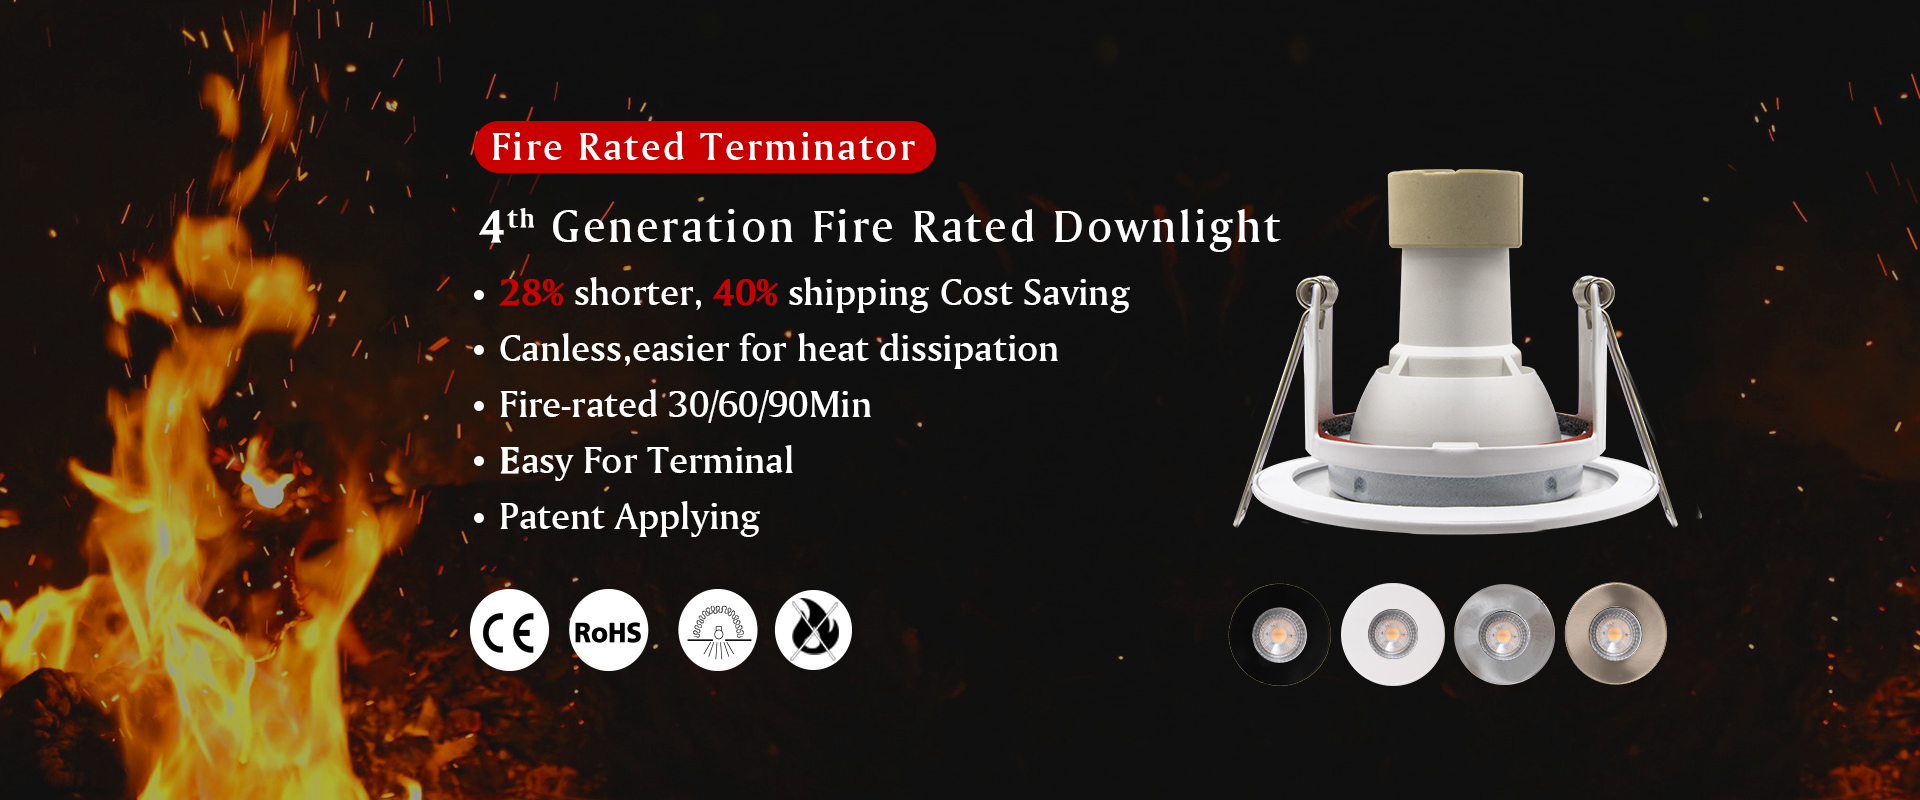 4th generation fire rated downlight